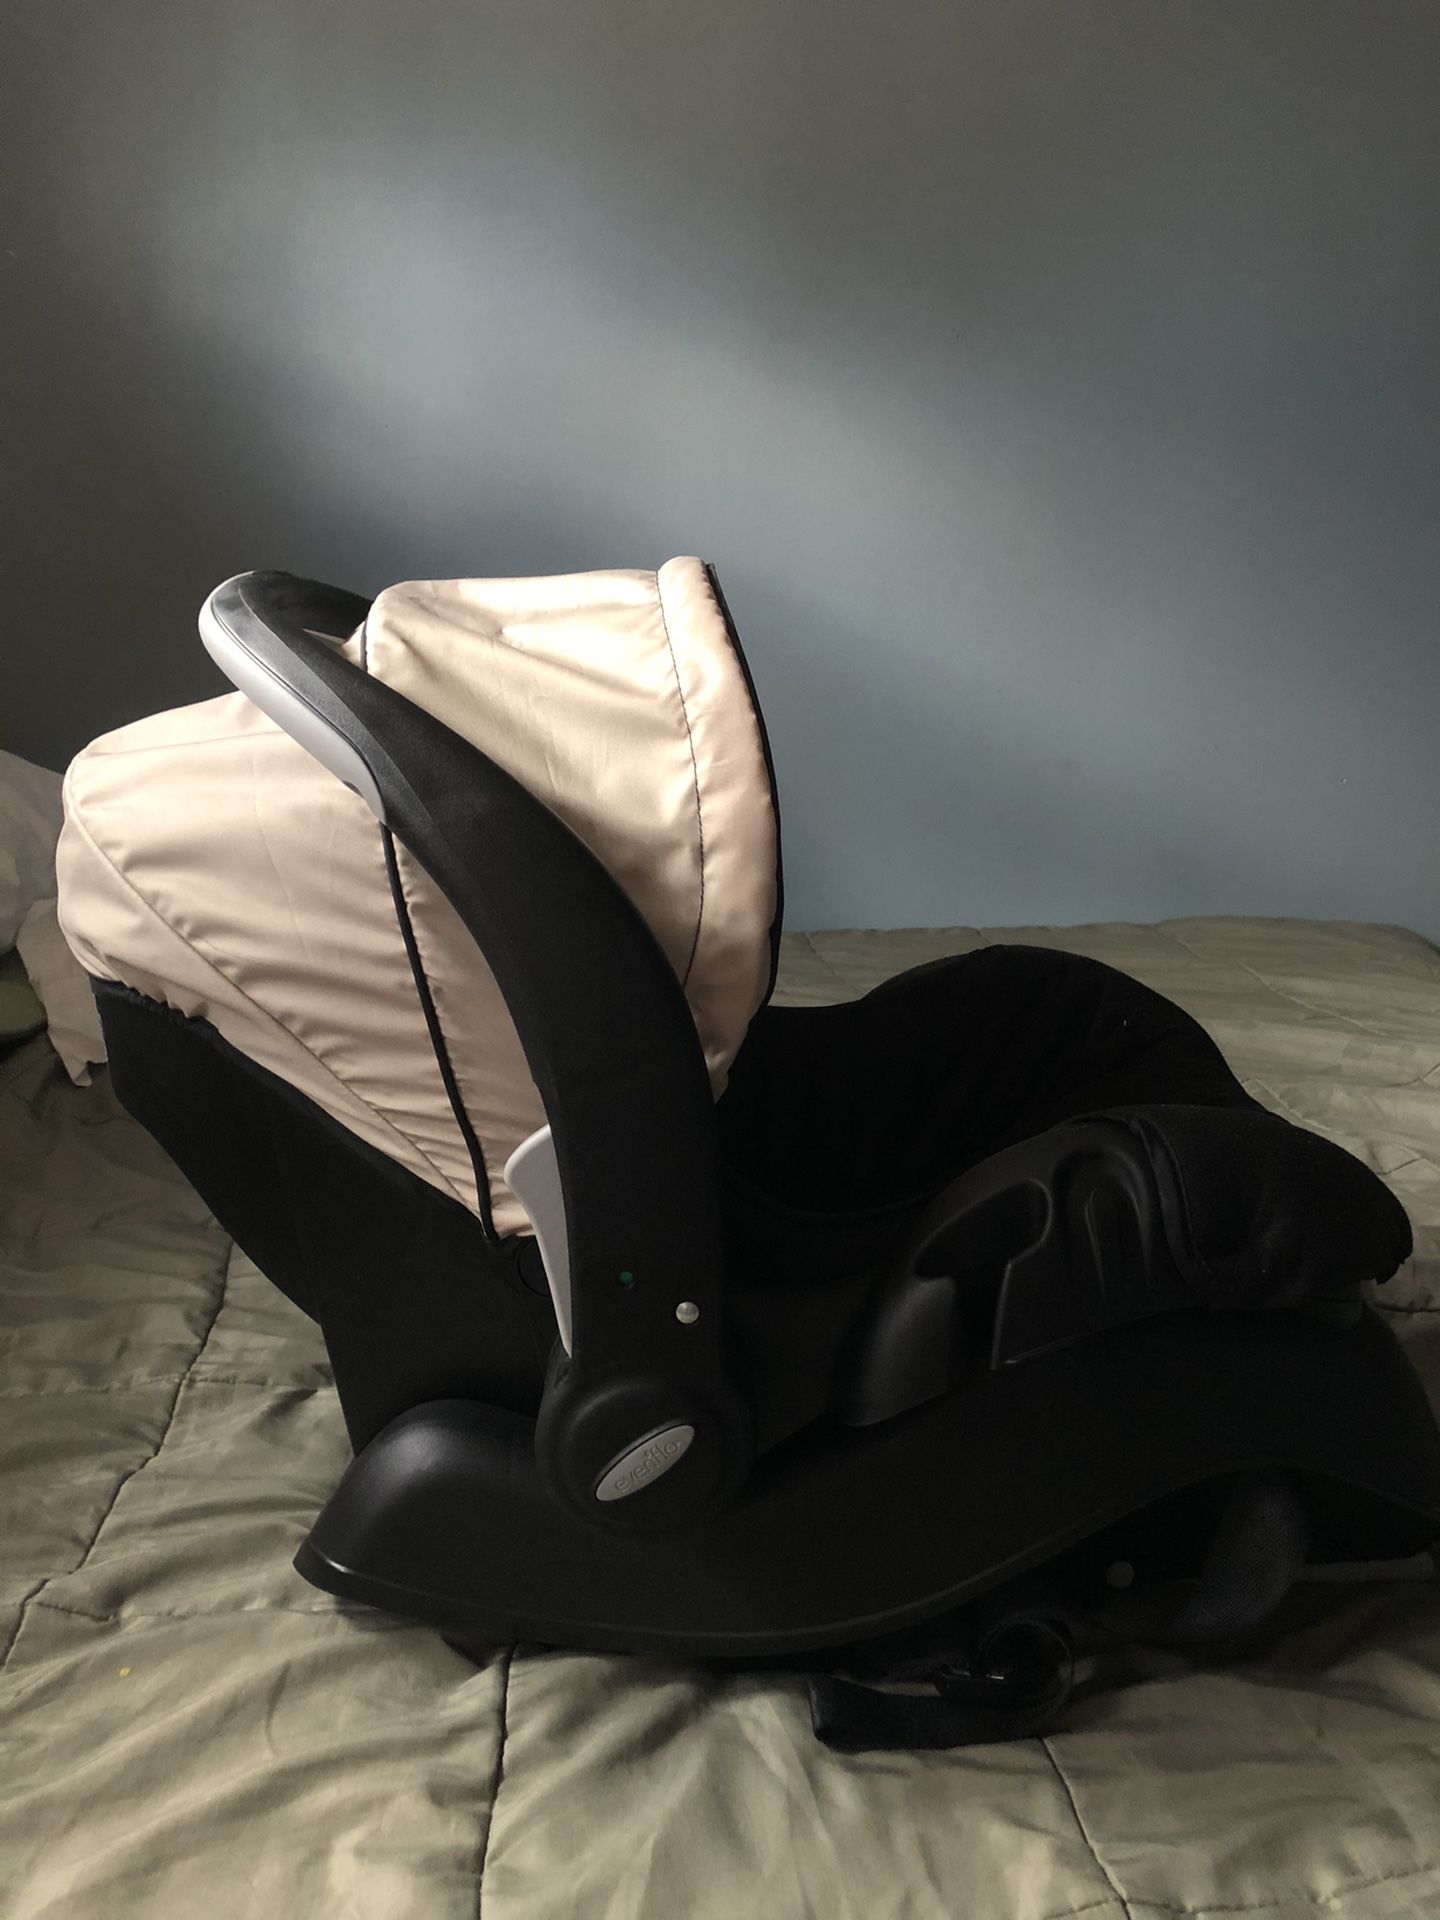 Evenflo Baby Car Seat with Base